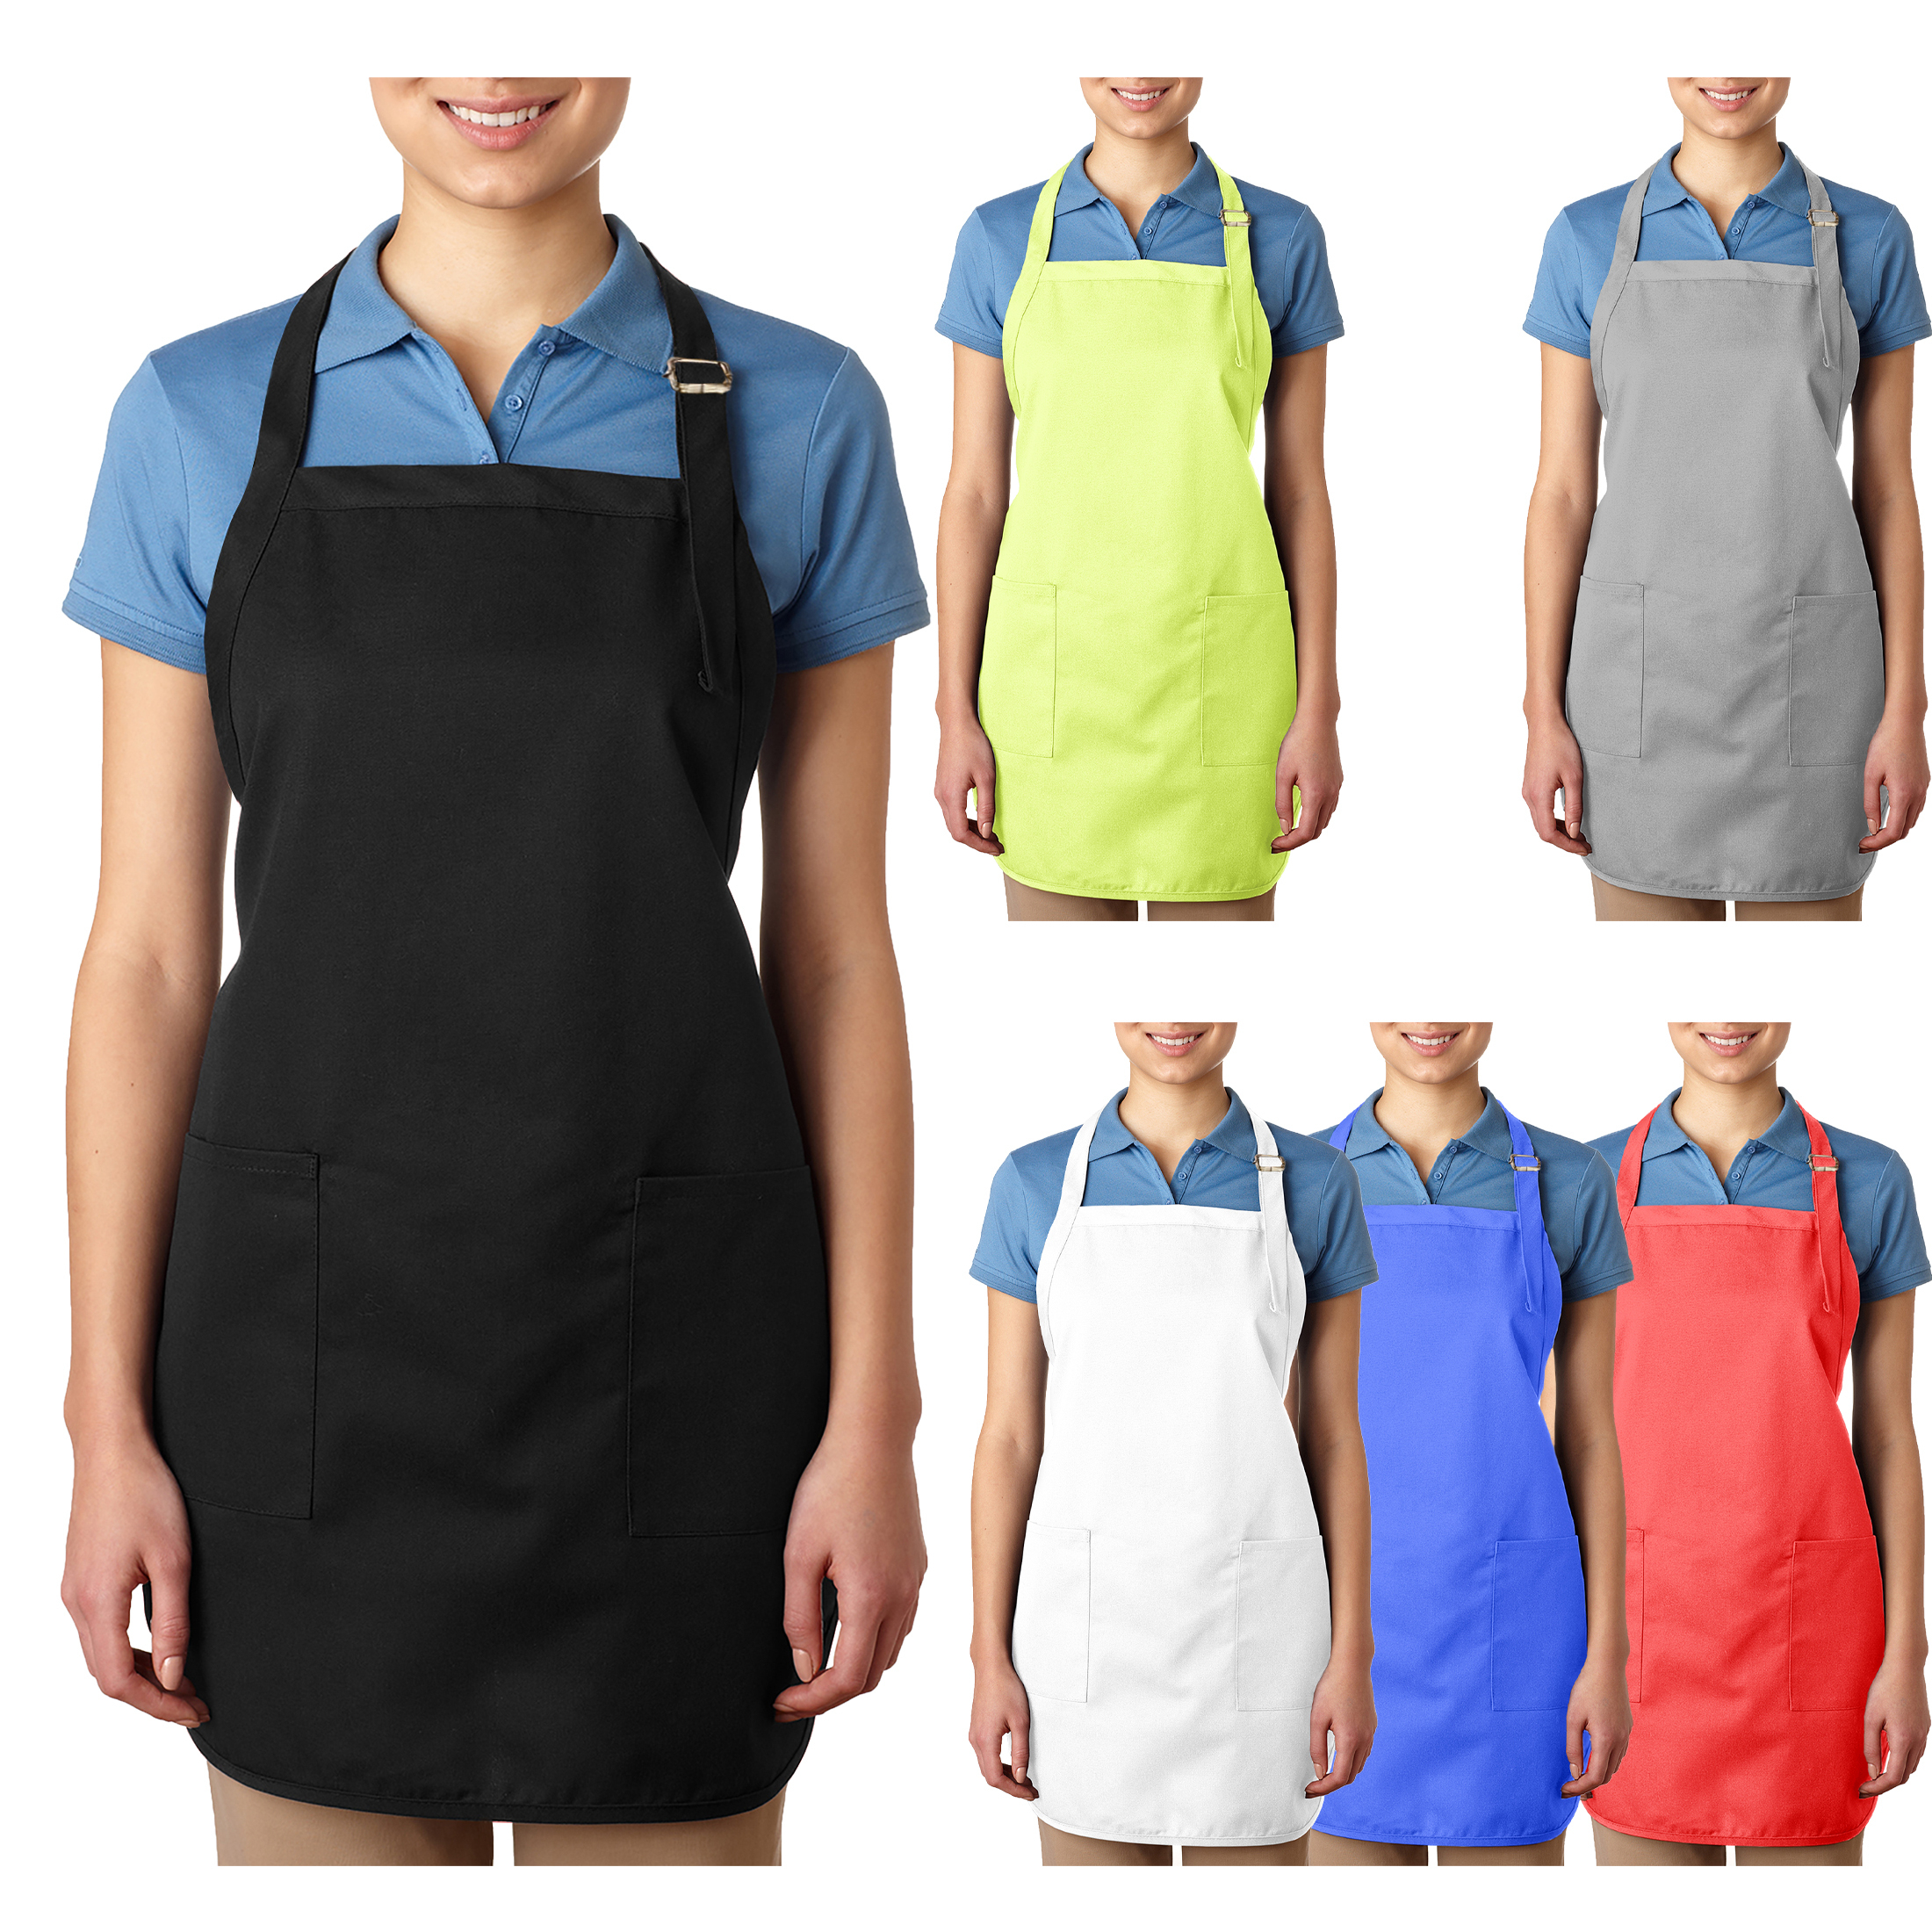 Multi-pack Unisex Deluxe Adjustable Bib Apron With Pockets - 1-Pack